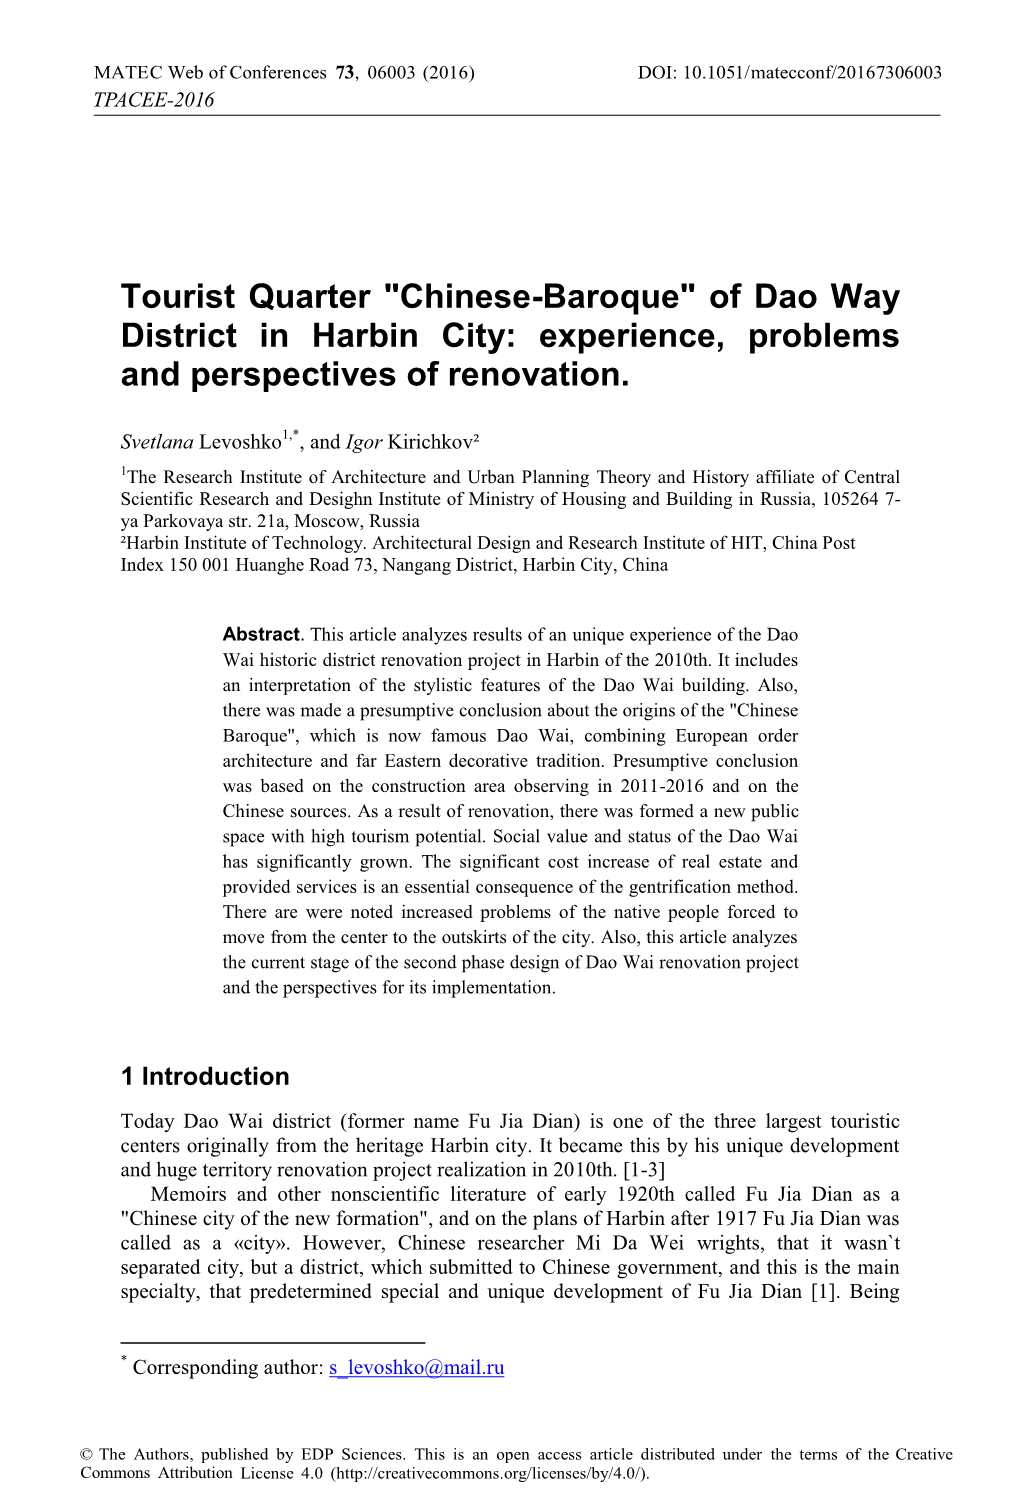 Chinese-Baroque" of Dao Way District in Harbin City: Experience, Problems and Perspectives of Renovation